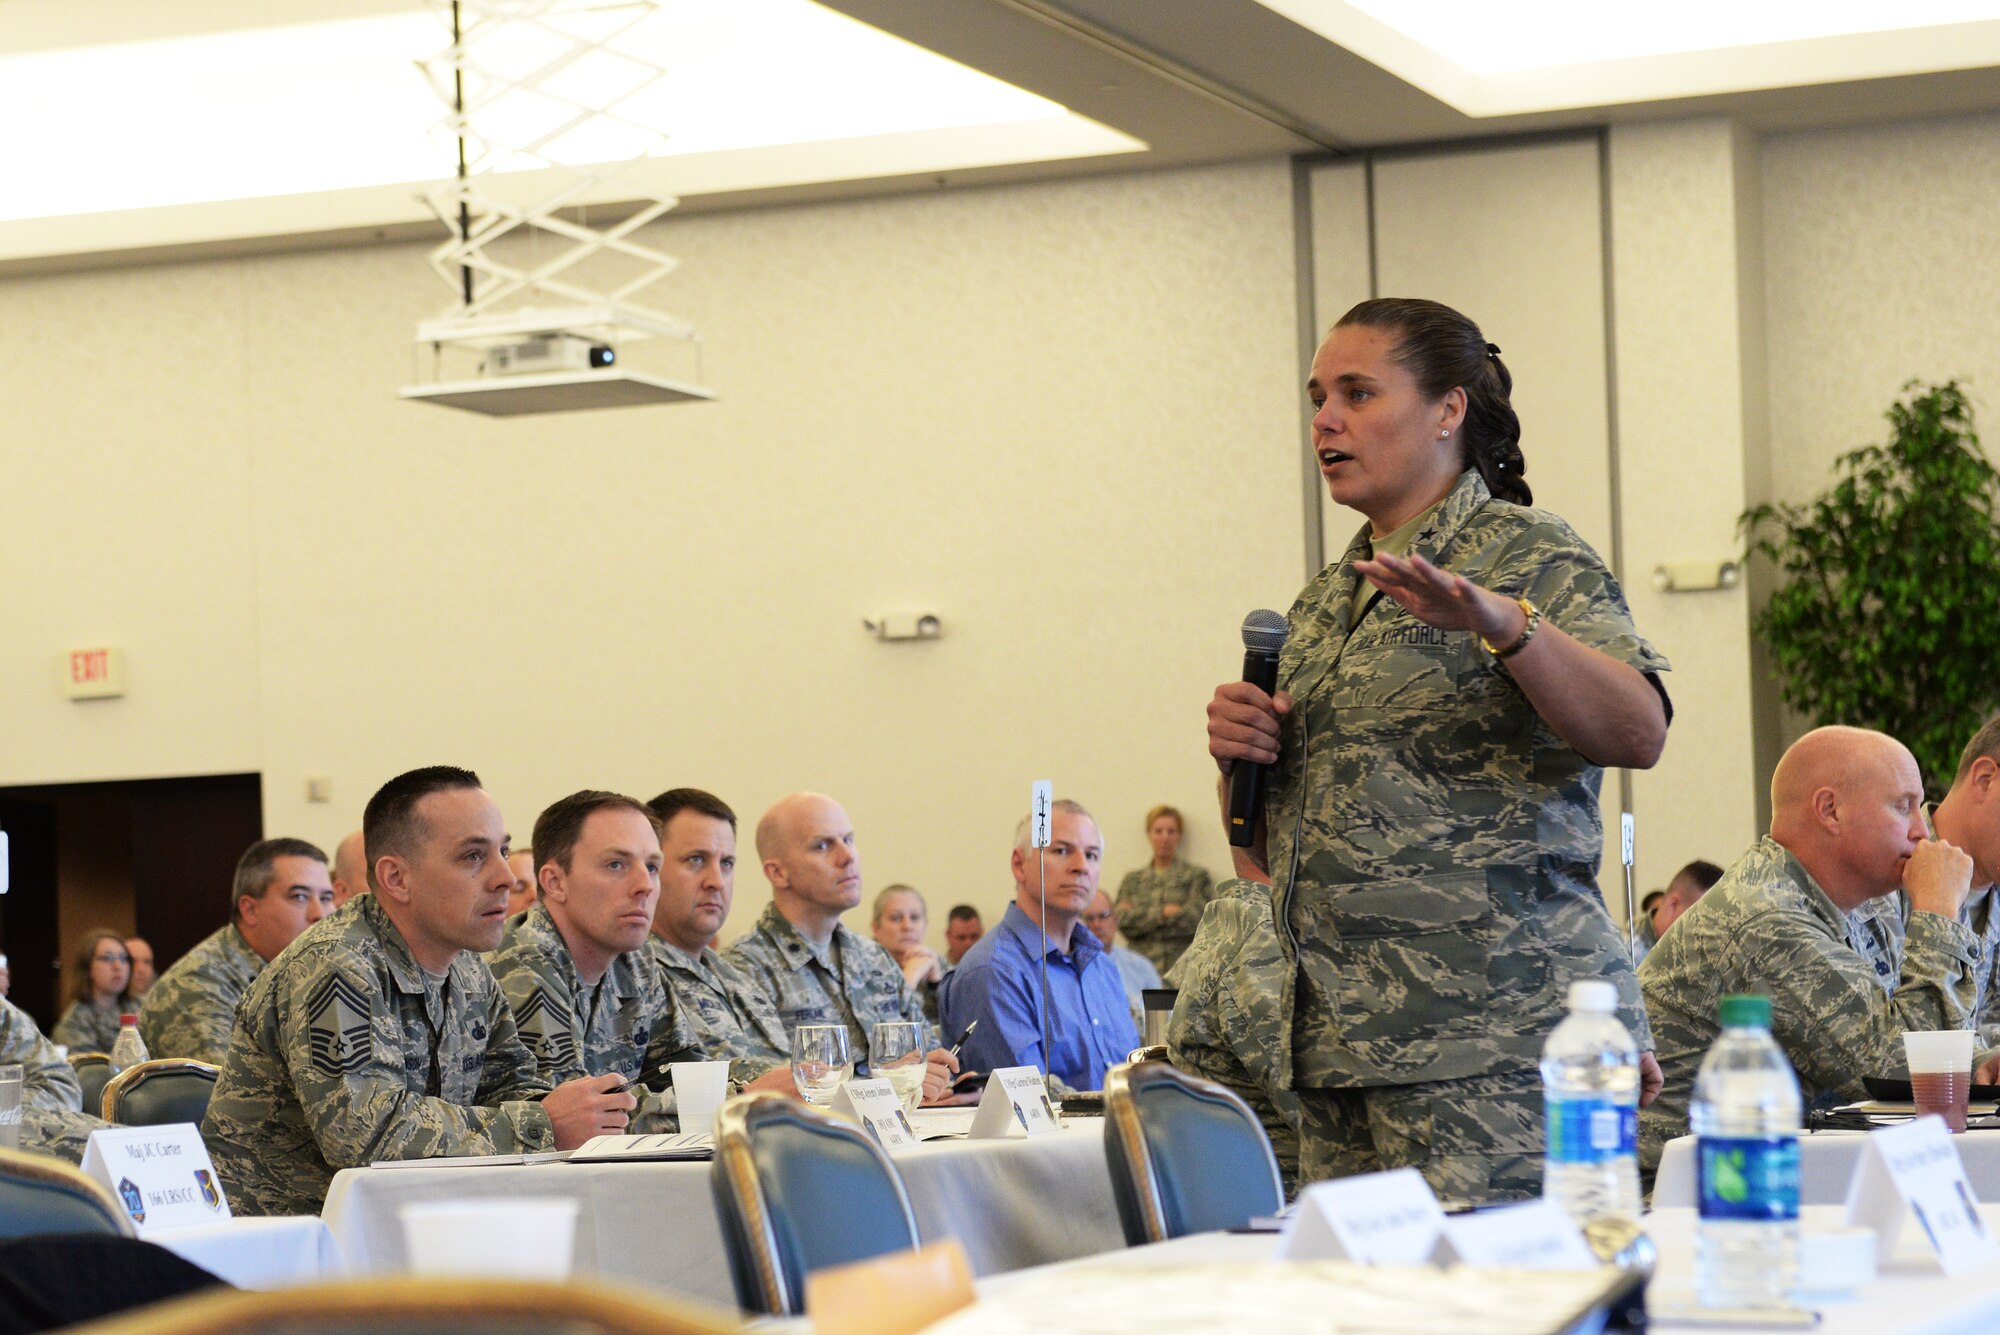 Brig. Gen. Linda Hurry, Air Force Installation and Mission Support Center Expeditionary Support director talks about the organization she works for and introduces her team during a logistics readiness summit at Scott Air Force Base March 22. Her and her team discussed readiness, field functional managers, support agreements and funding. (U.S. Air Force photo by Tech. Sgt. Maria Castle)